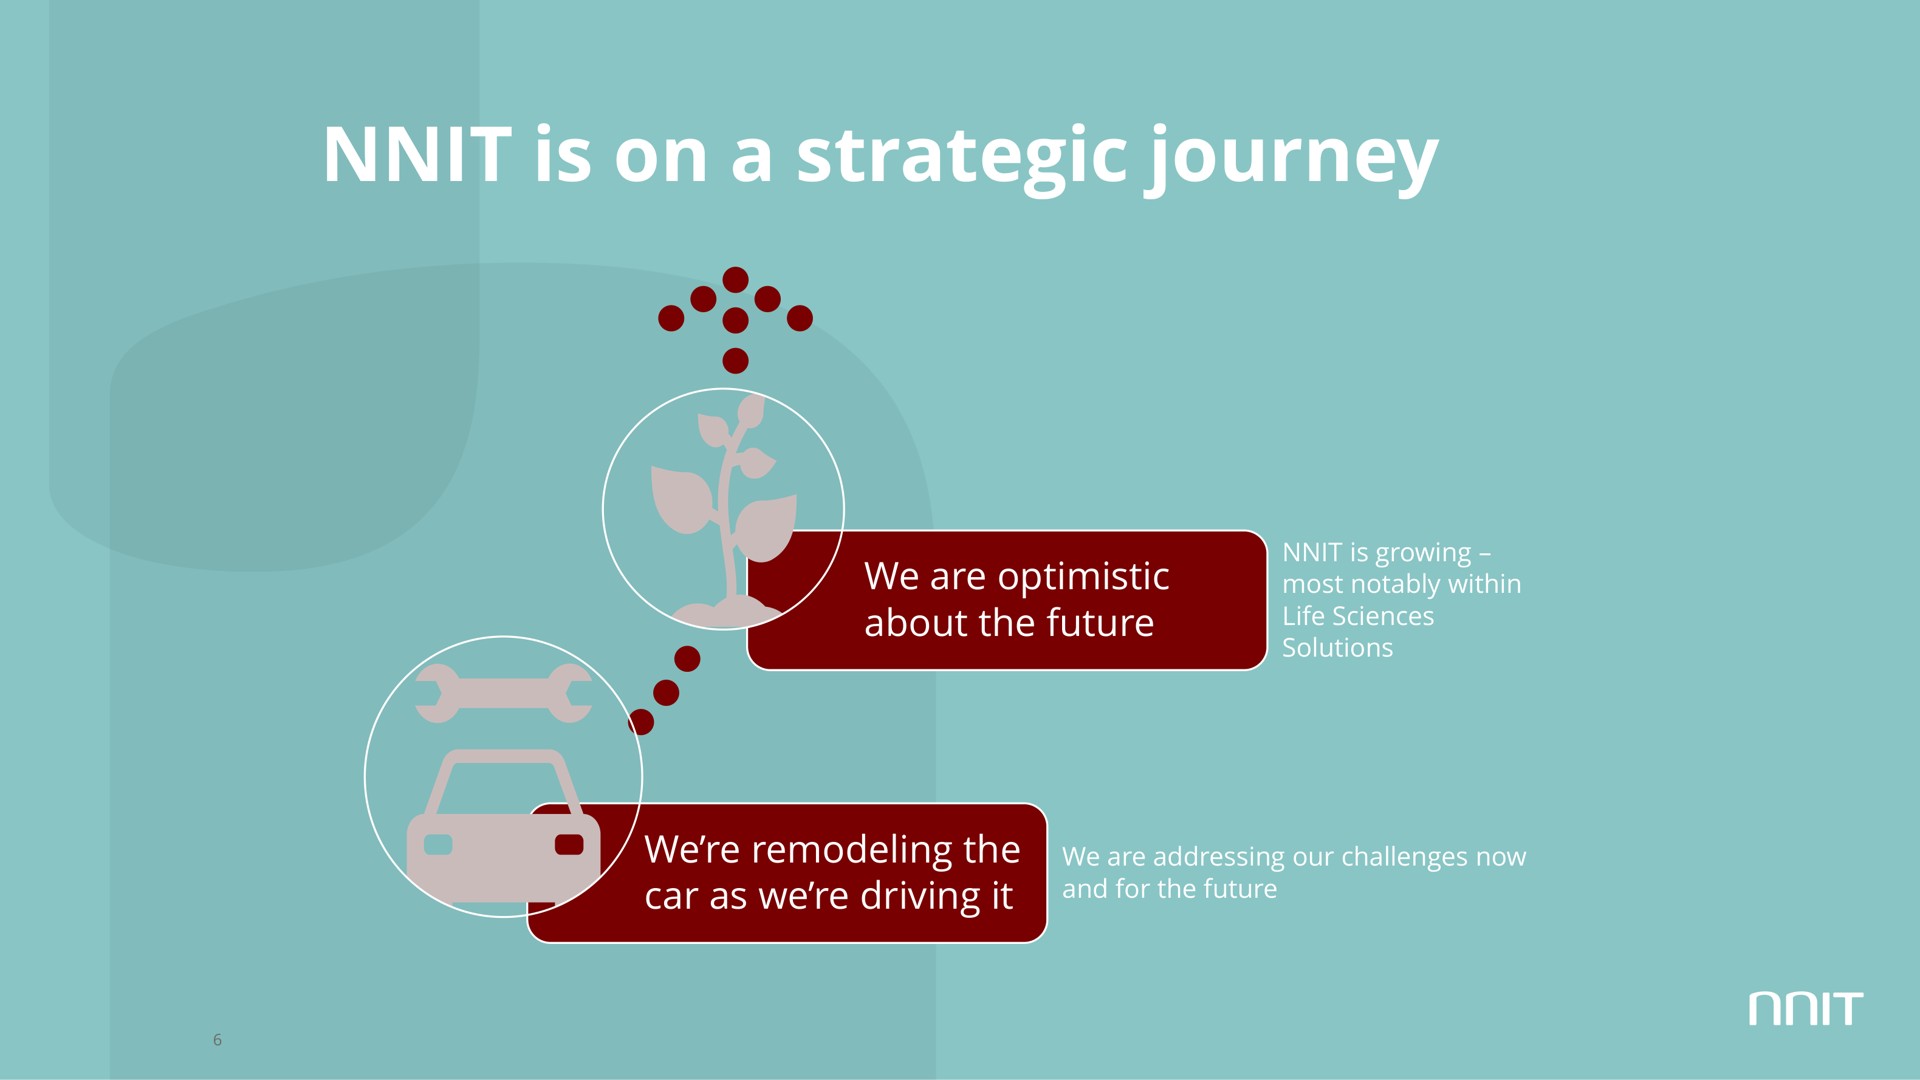 is on a strategic journey | NNIT